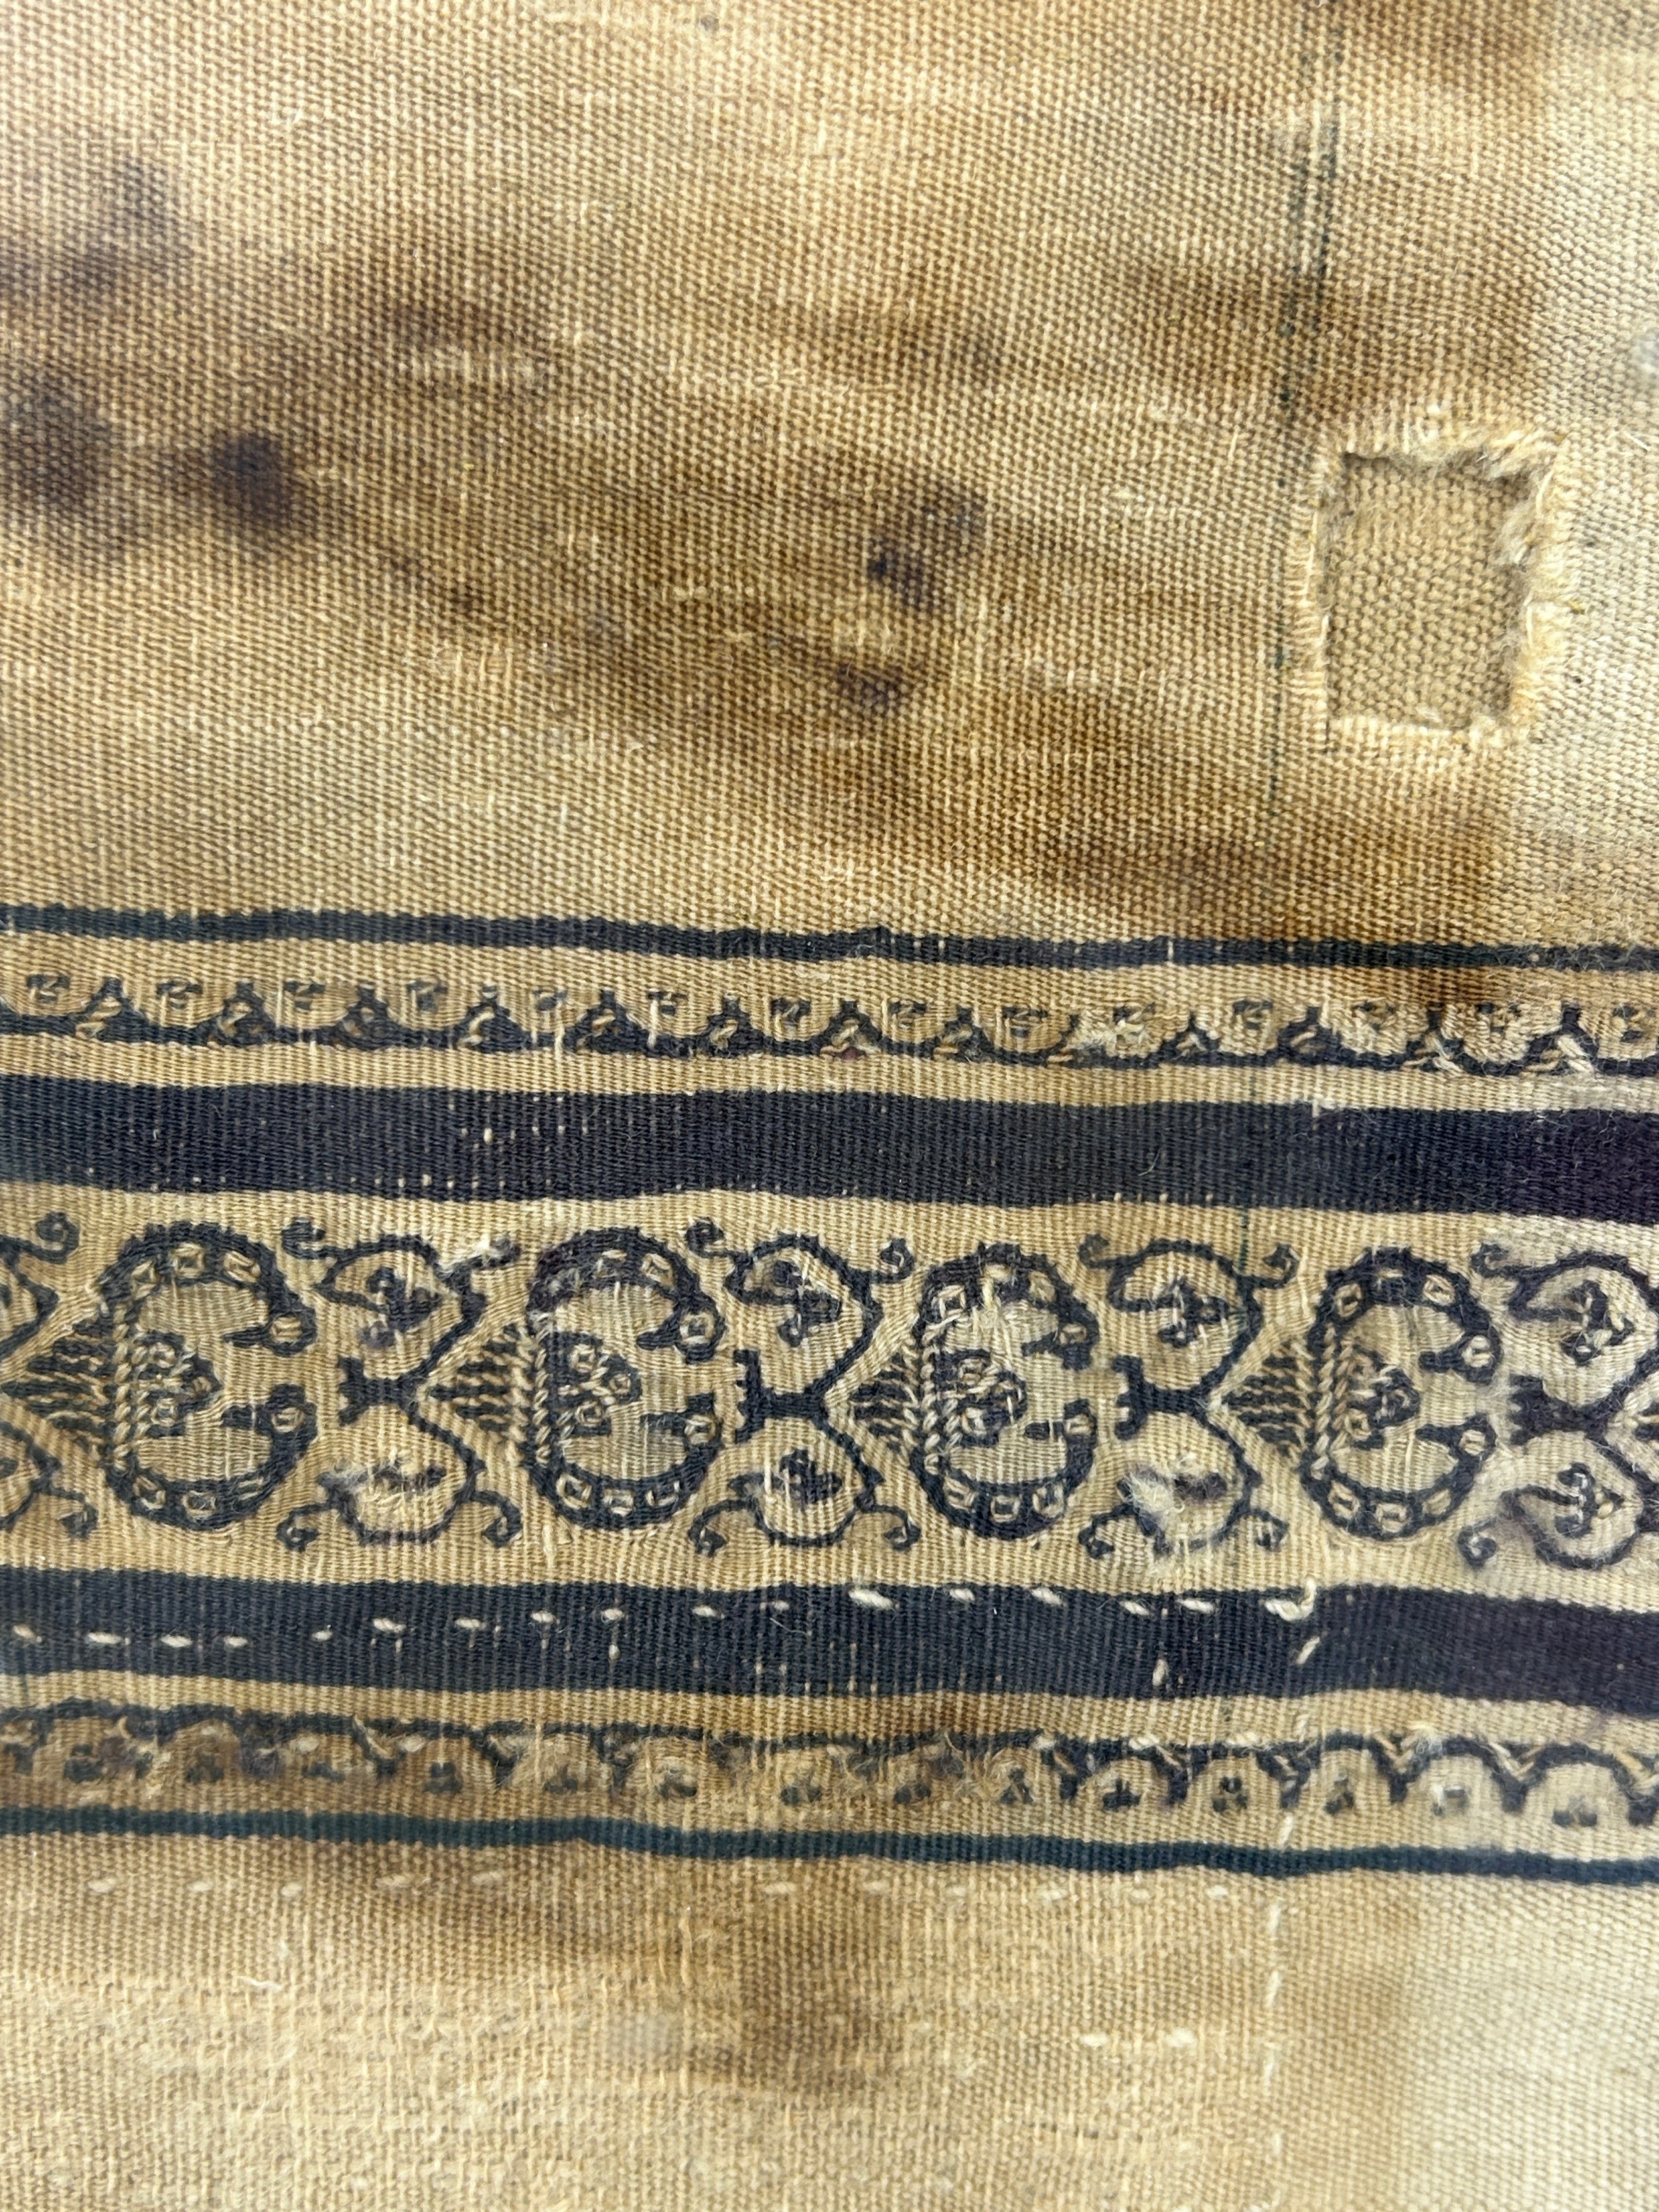 A COPTIC LINEN AND WOOL TEXTILE CIRCA 5TH-8TH CENTURY A.D. For similar see Bonhams Lot 330, ' - Image 5 of 10